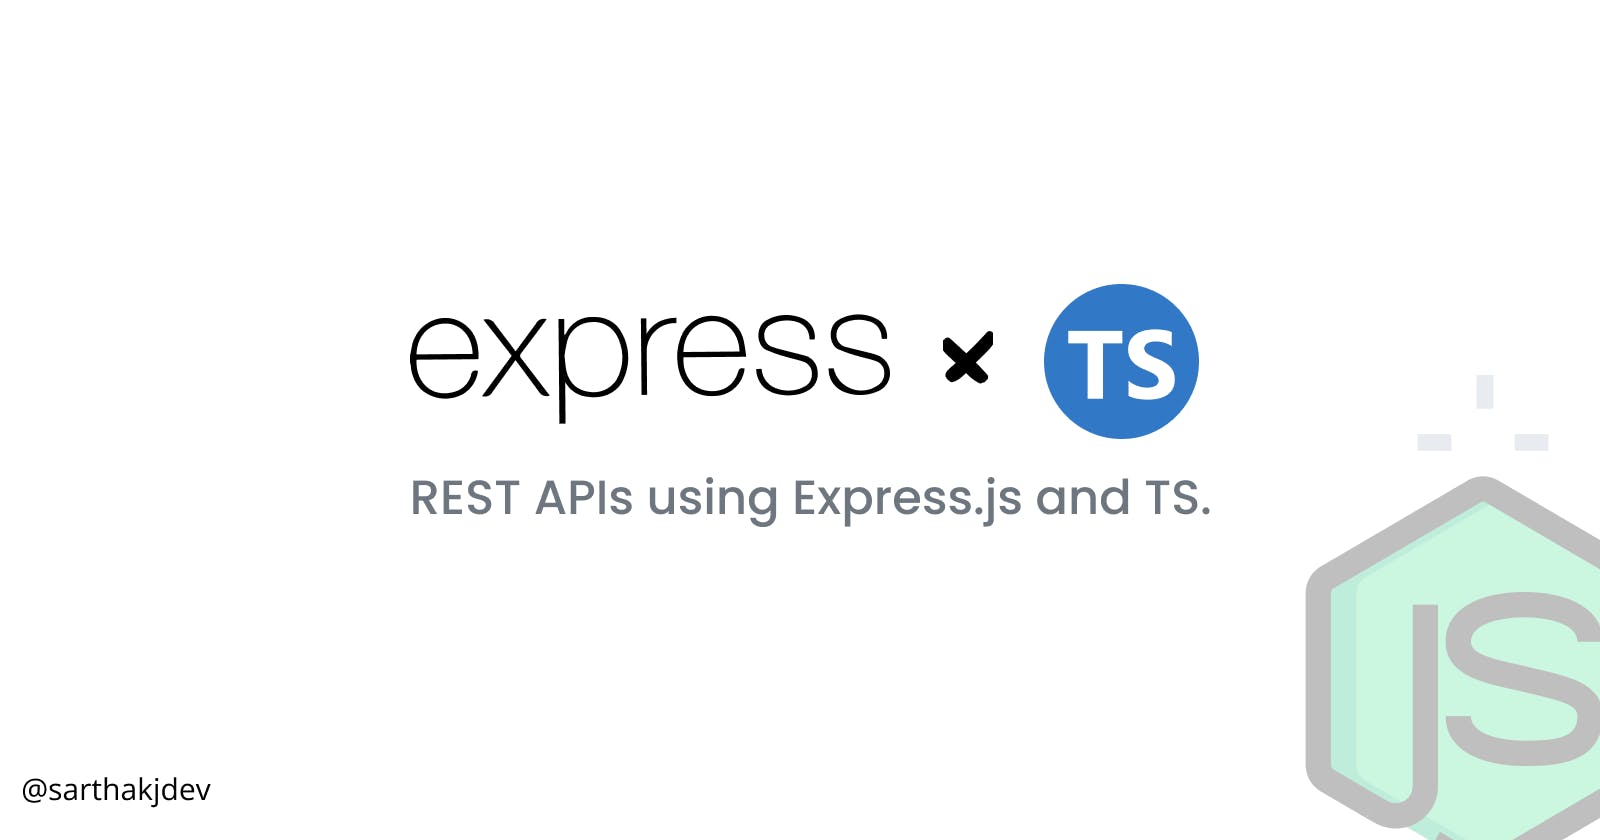 How to develop REST APIs using Express.js and Typescript?